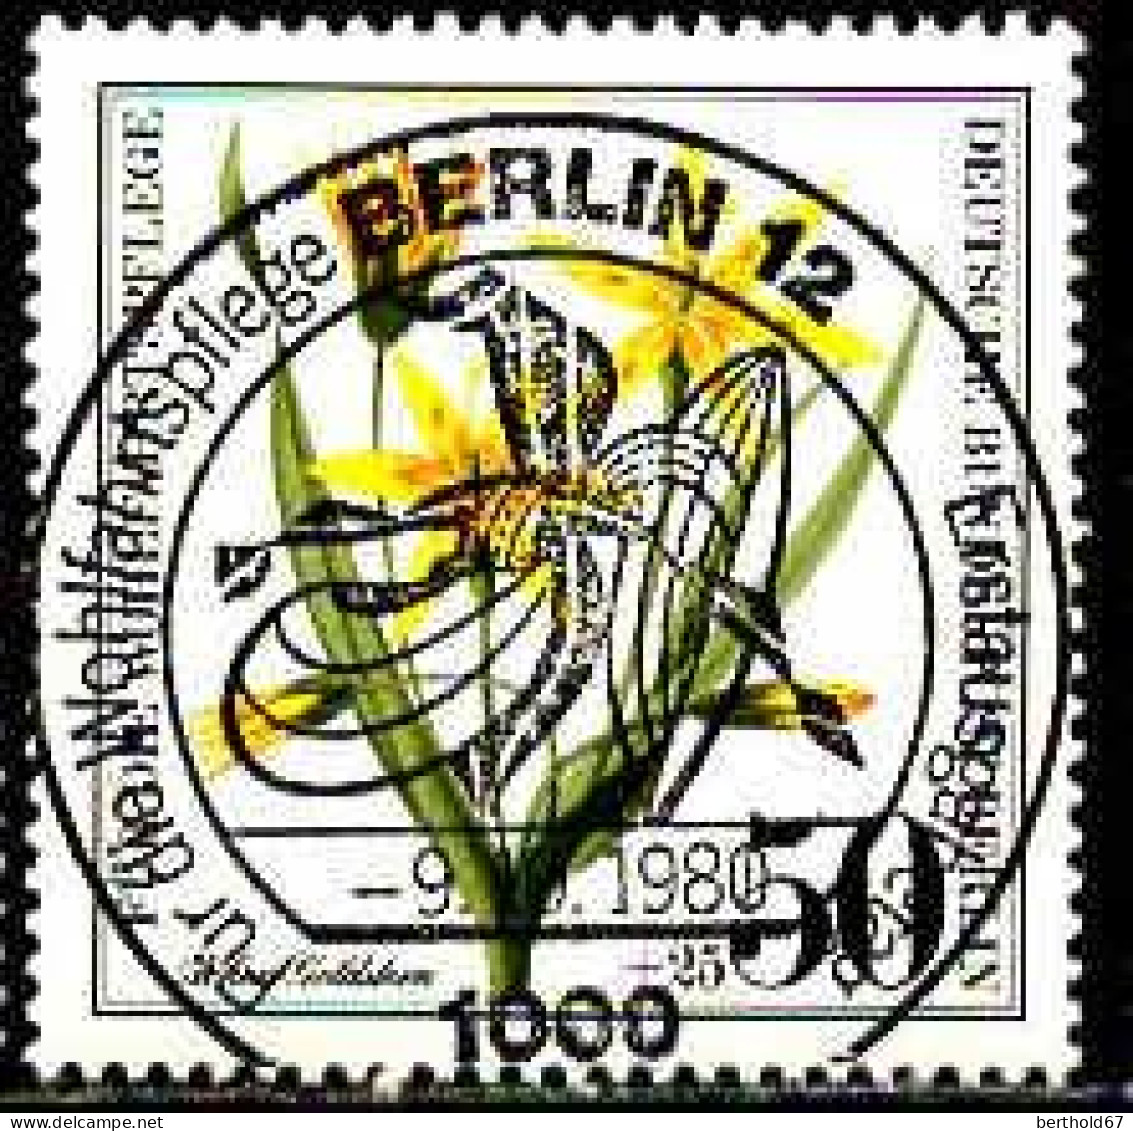 Berlin Poste Obl Yv:590/593 Bienfaisance Herbes Des Champs (TB Cachet Rond) - Used Stamps